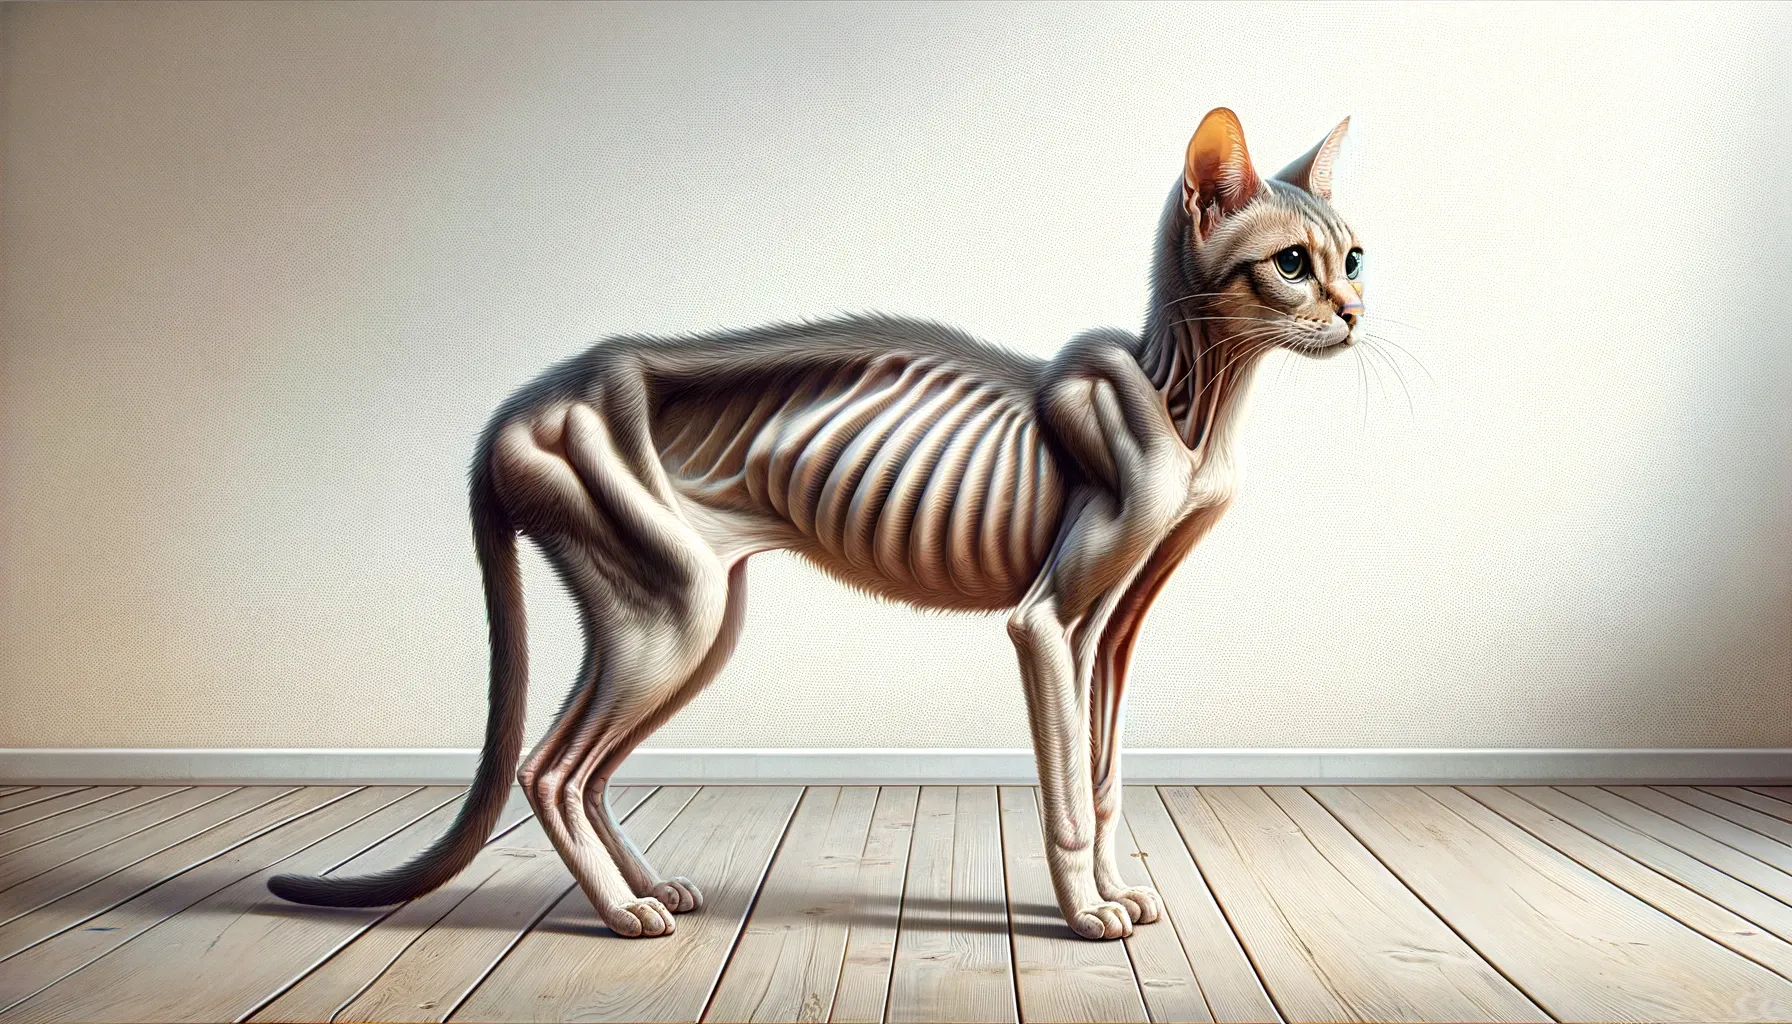 How Skinny Can a Cat Get Before It Dies